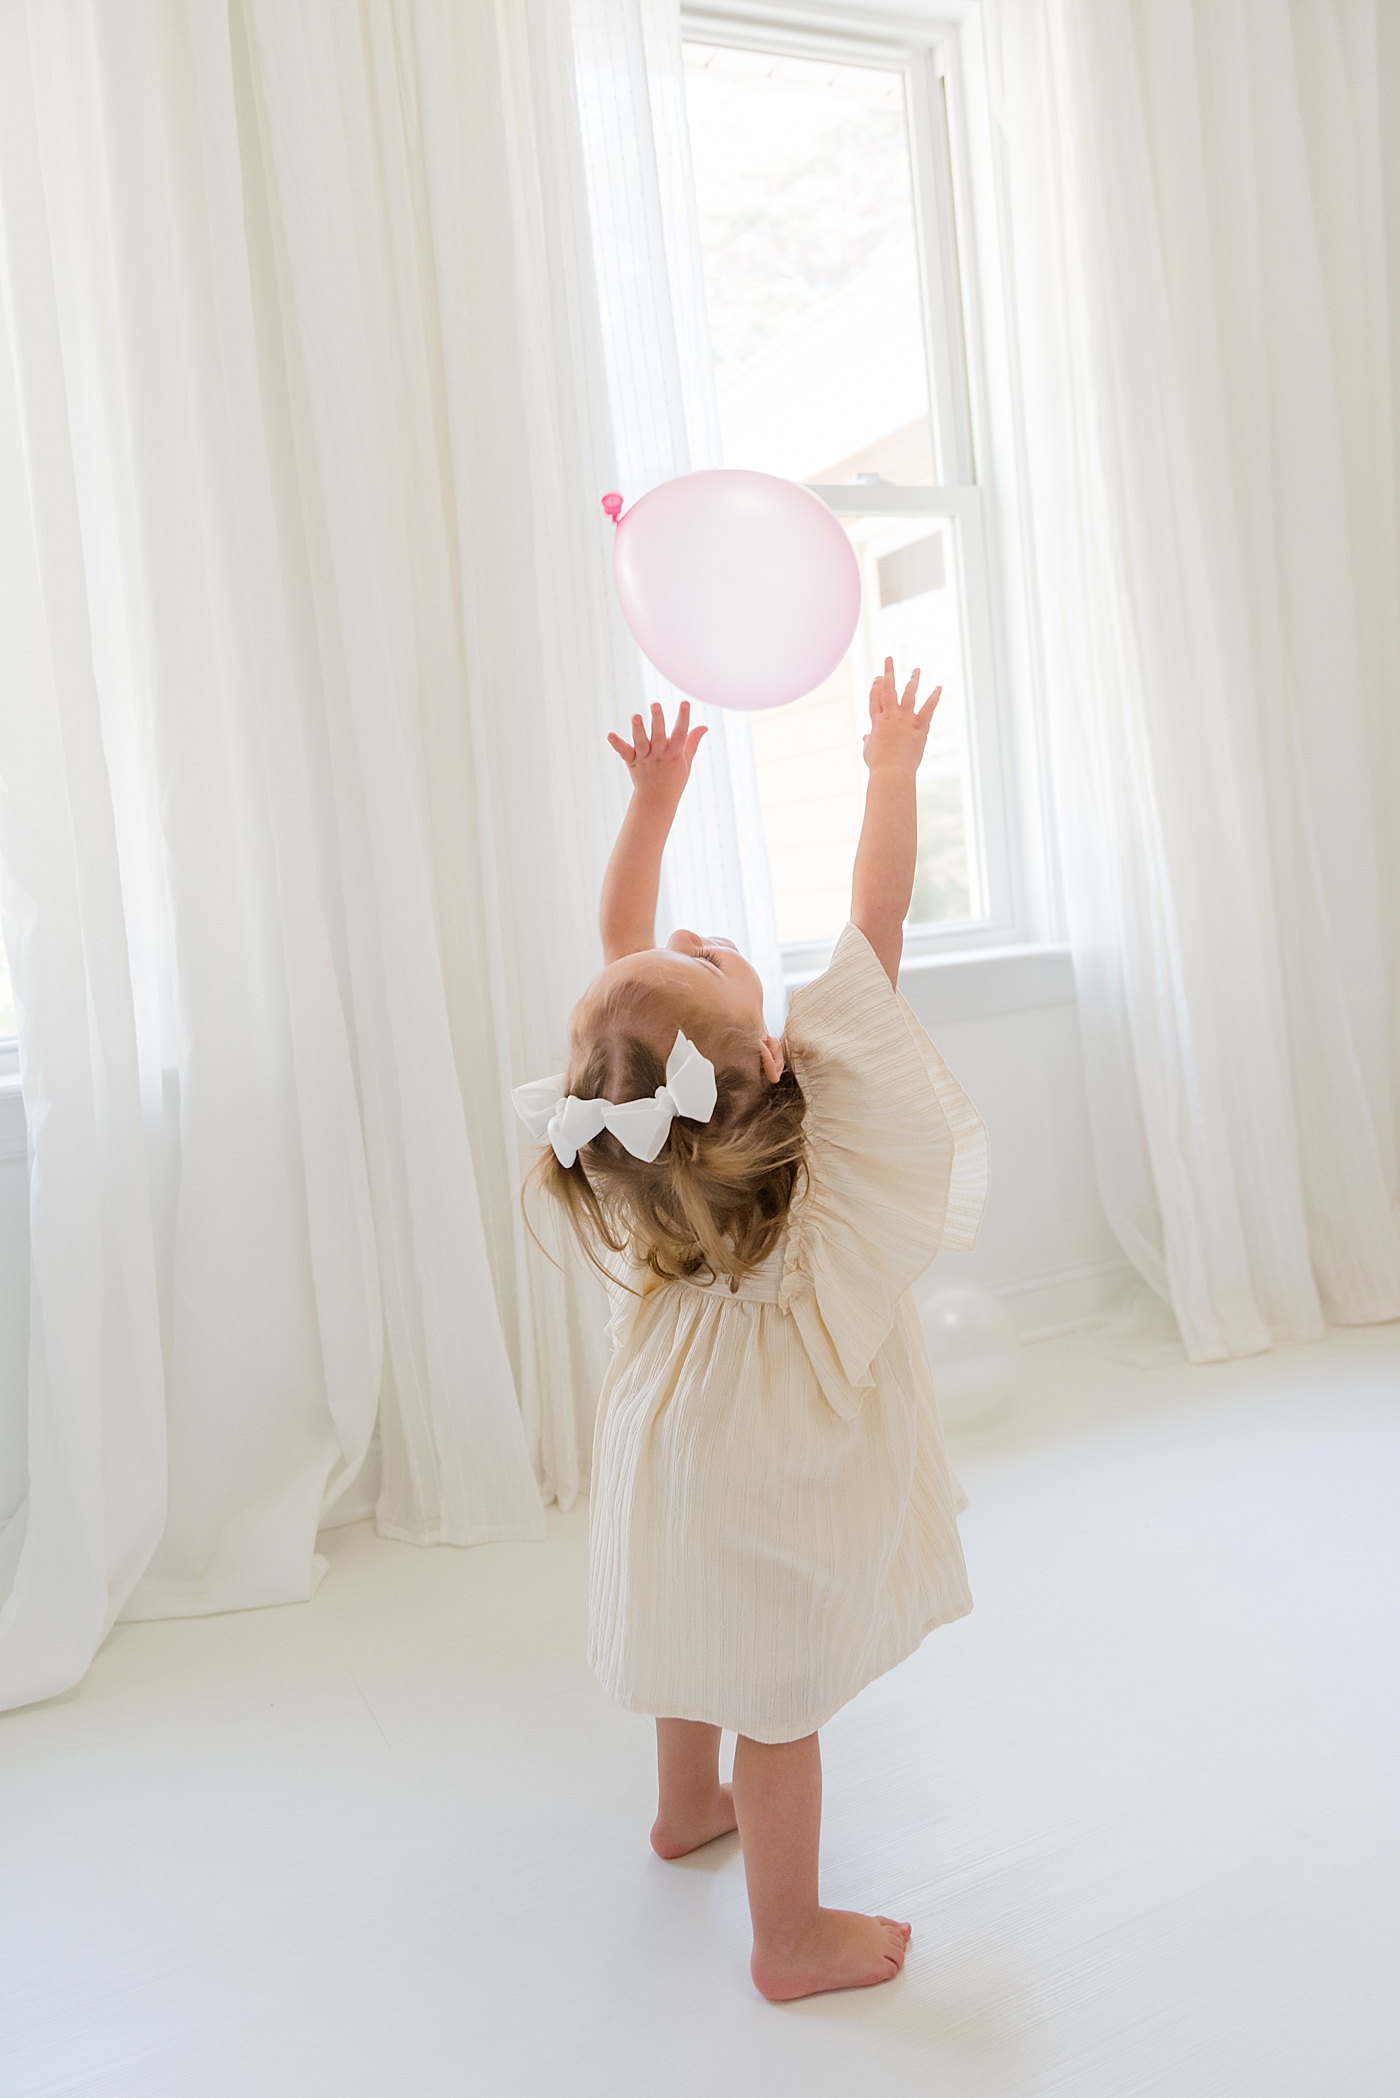 Little girl playing with balloons in the studio | Photo by Anna Wisjo Photography